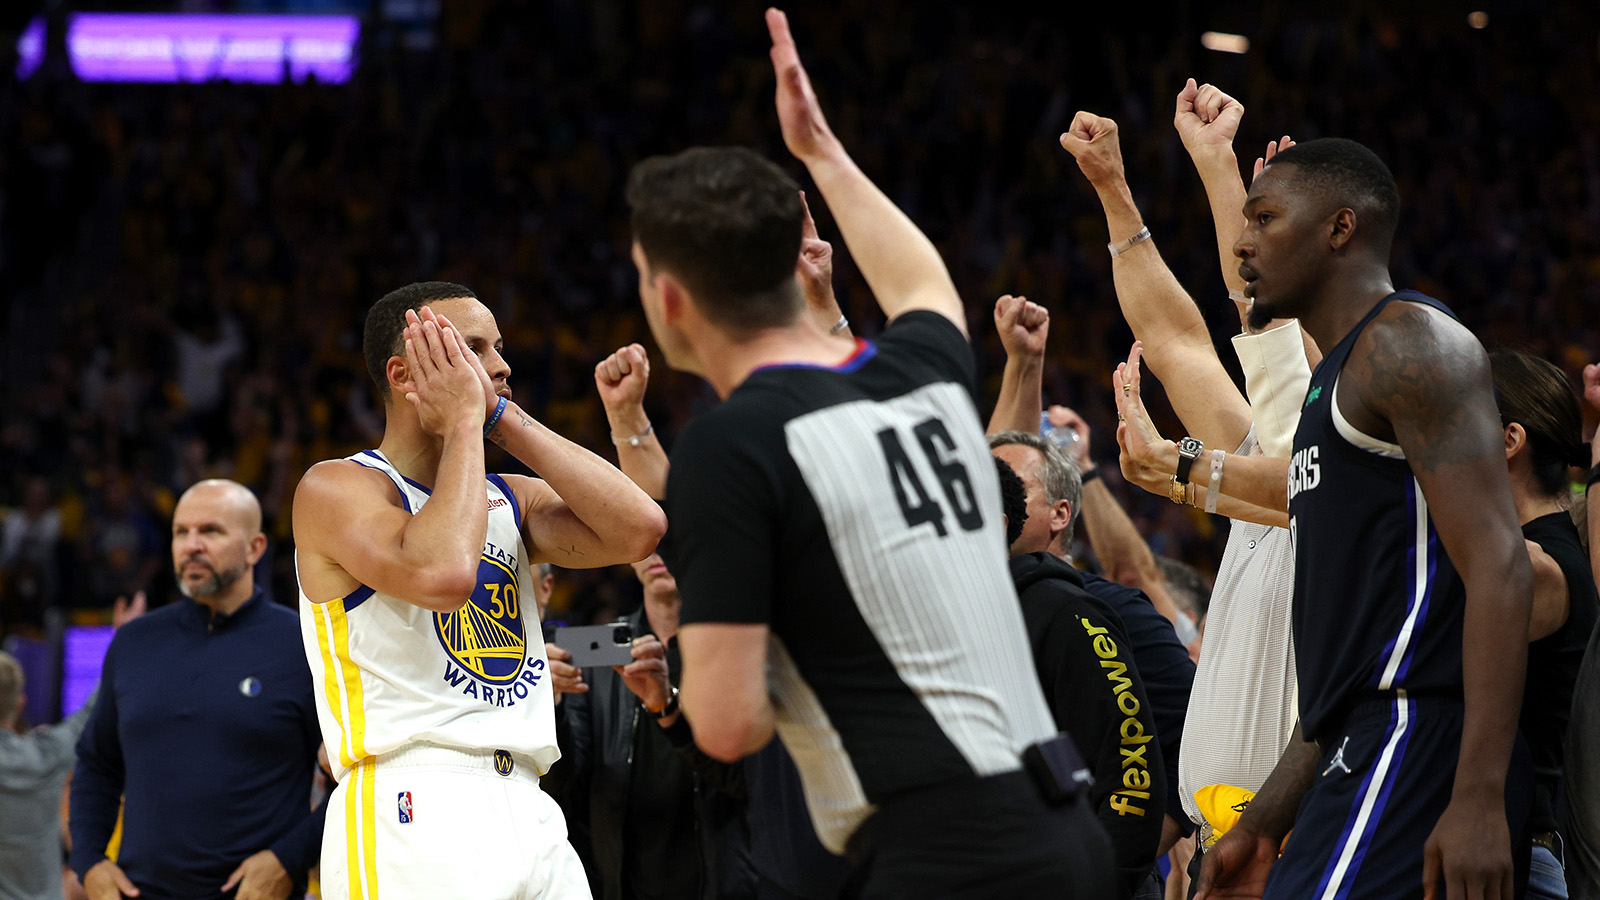 Steph Curry approves of Alex Morgan's iconic 'night night' celebration - NBC Sports